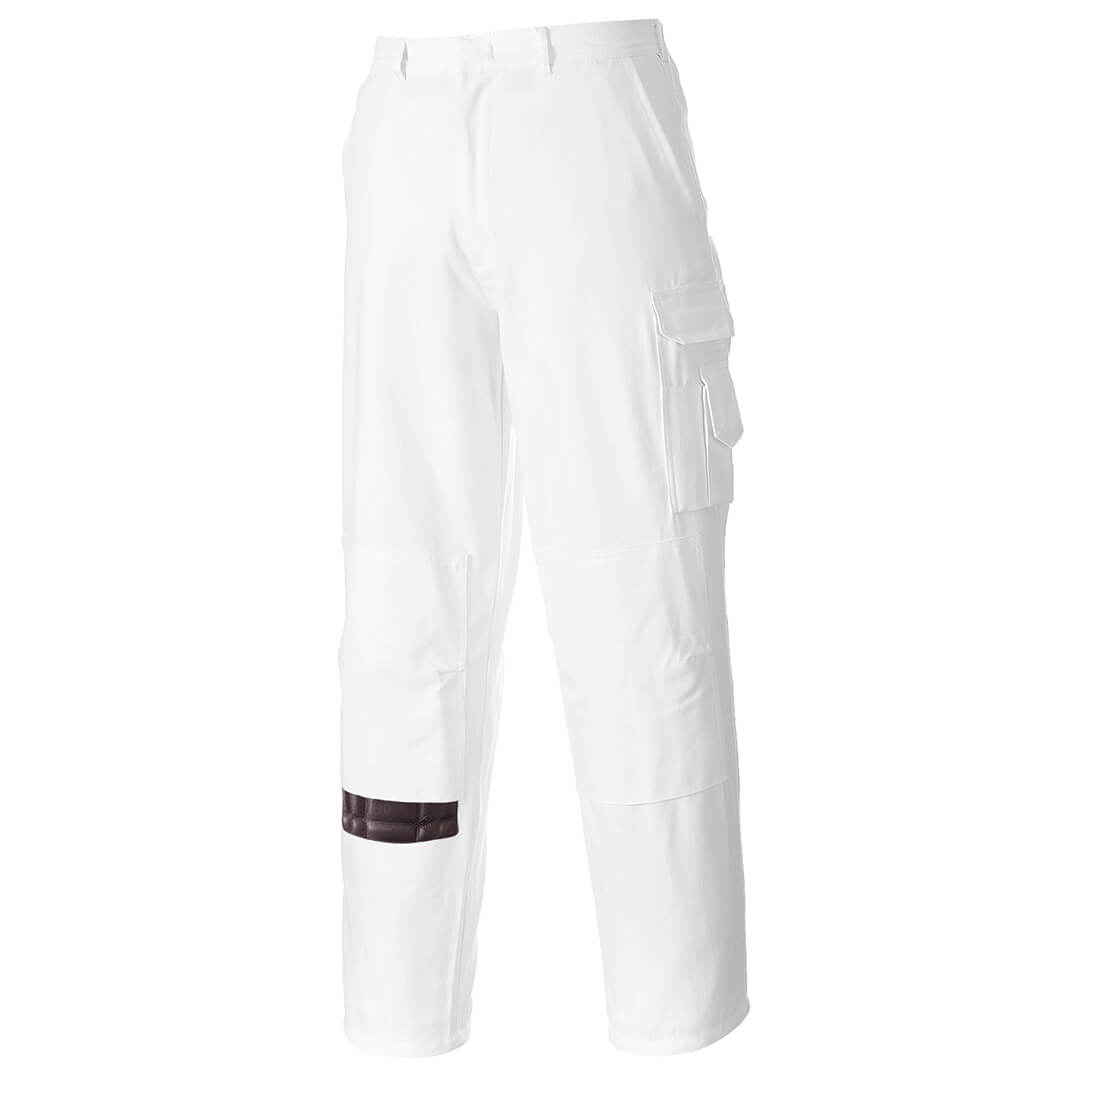 Image of Portwest Painters Trousers White L 33"